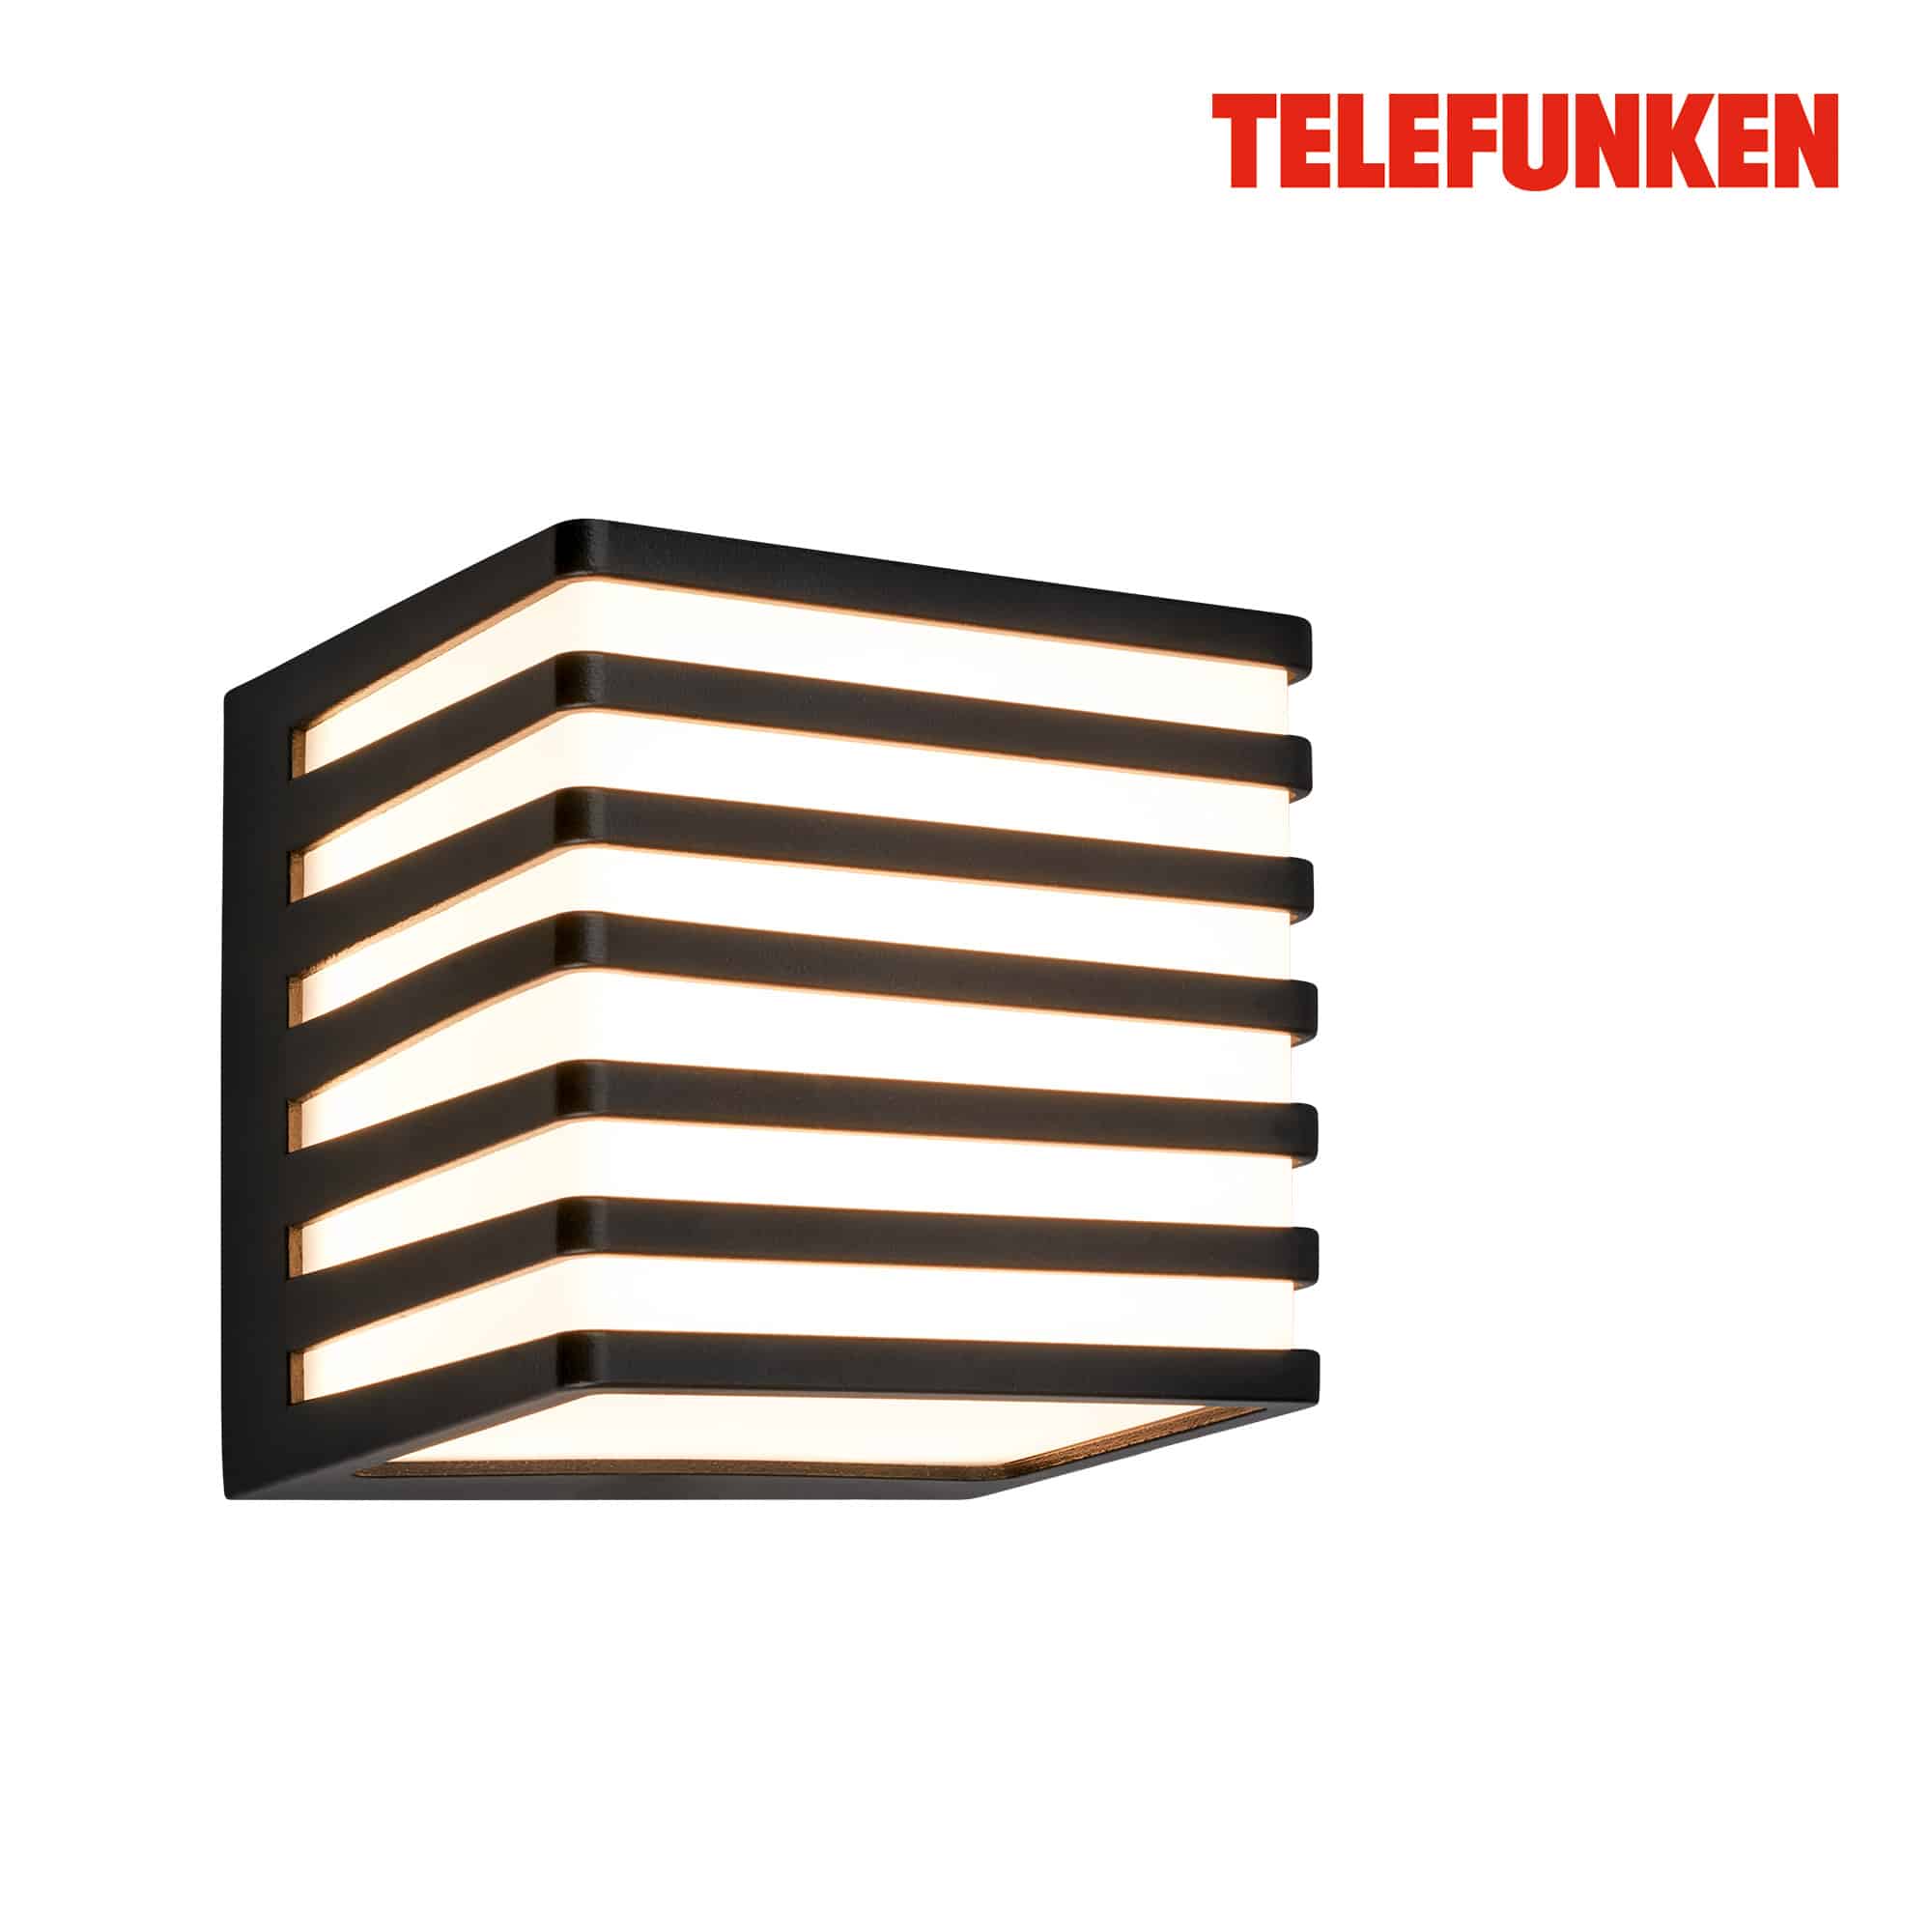 Telefunken LED wall lamp, splash and dust protection, On/Off